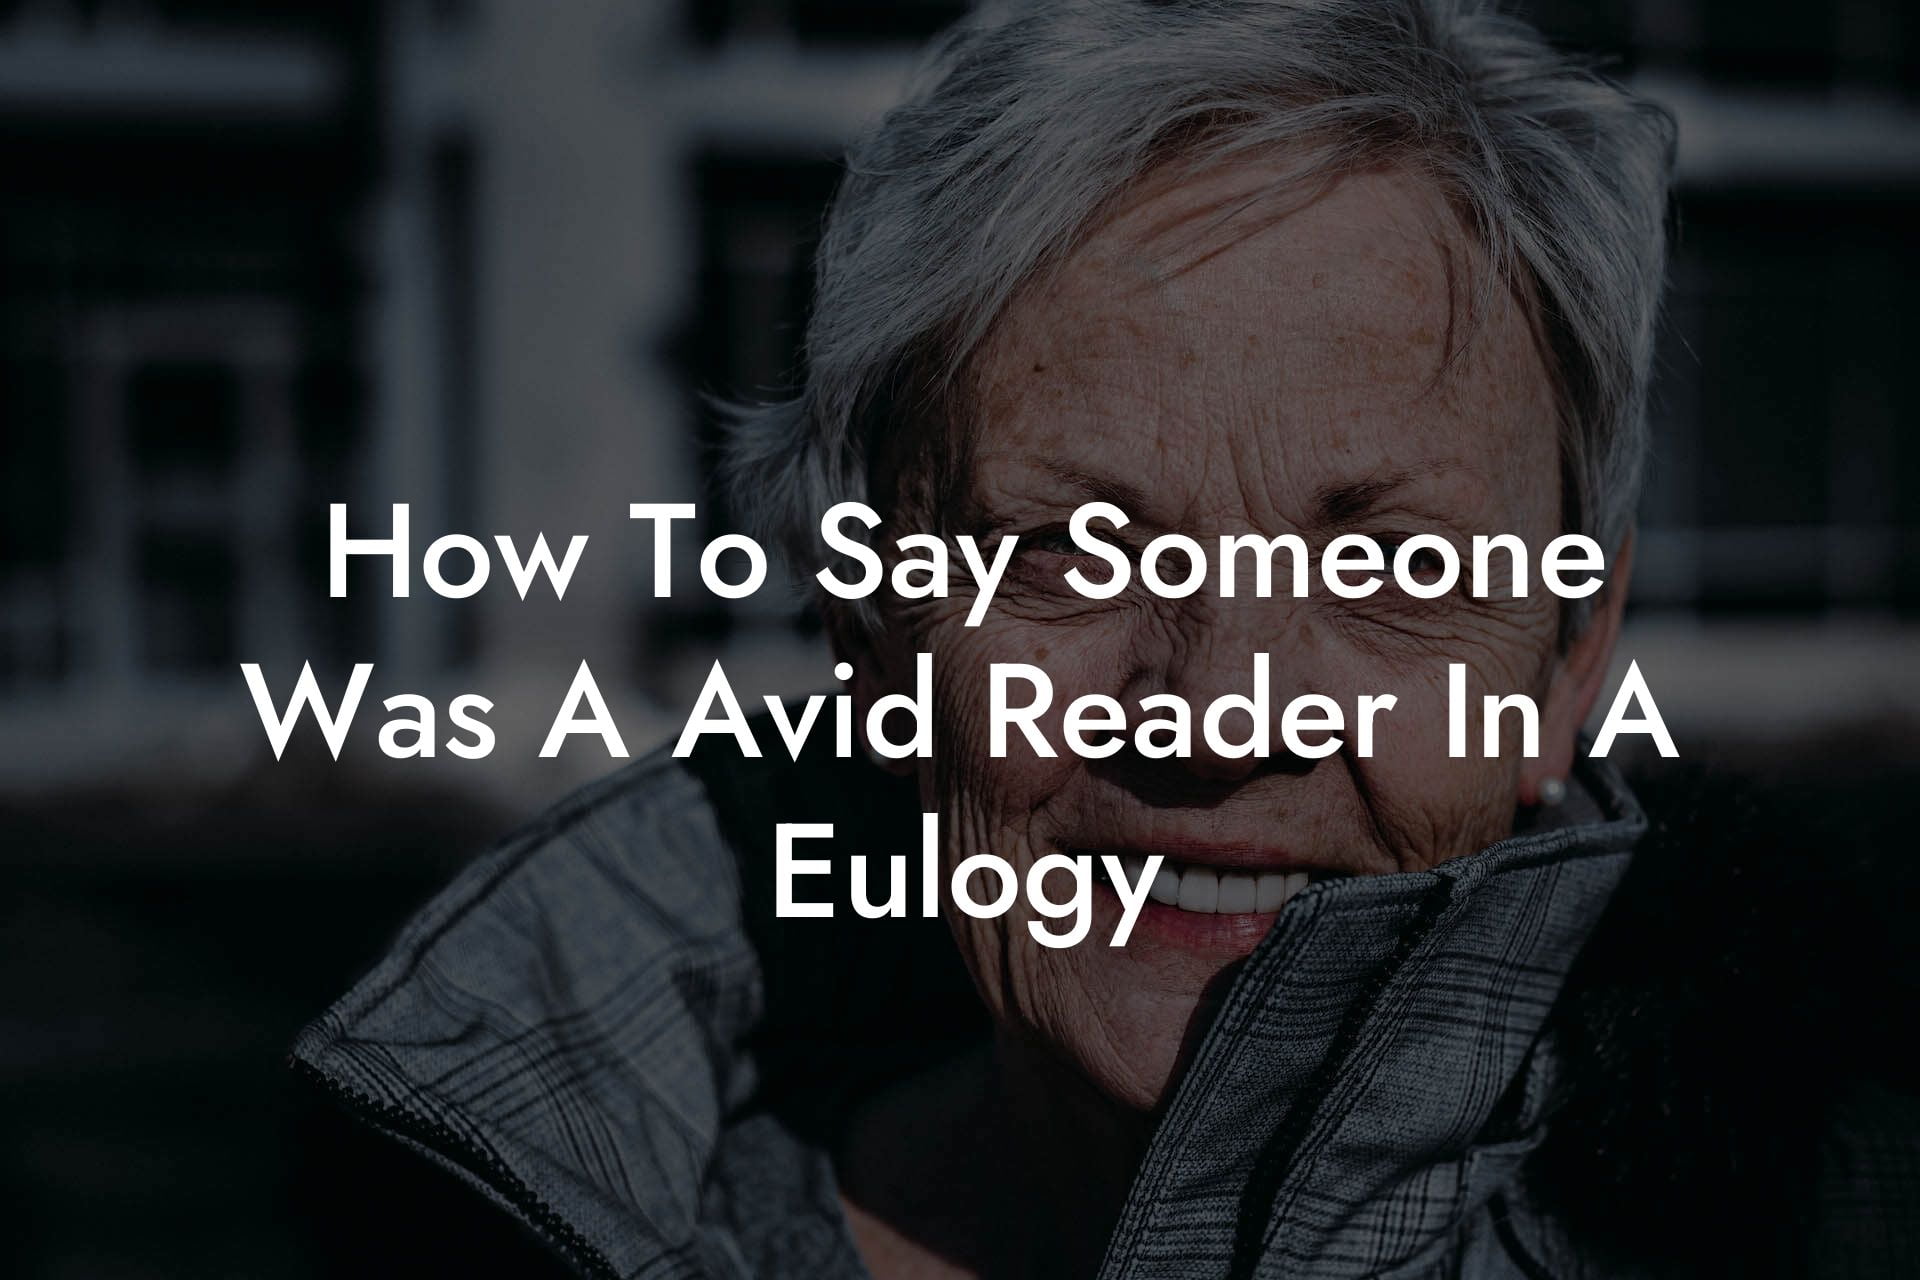 How To Say Someone Was A Avid Reader In A Eulogy